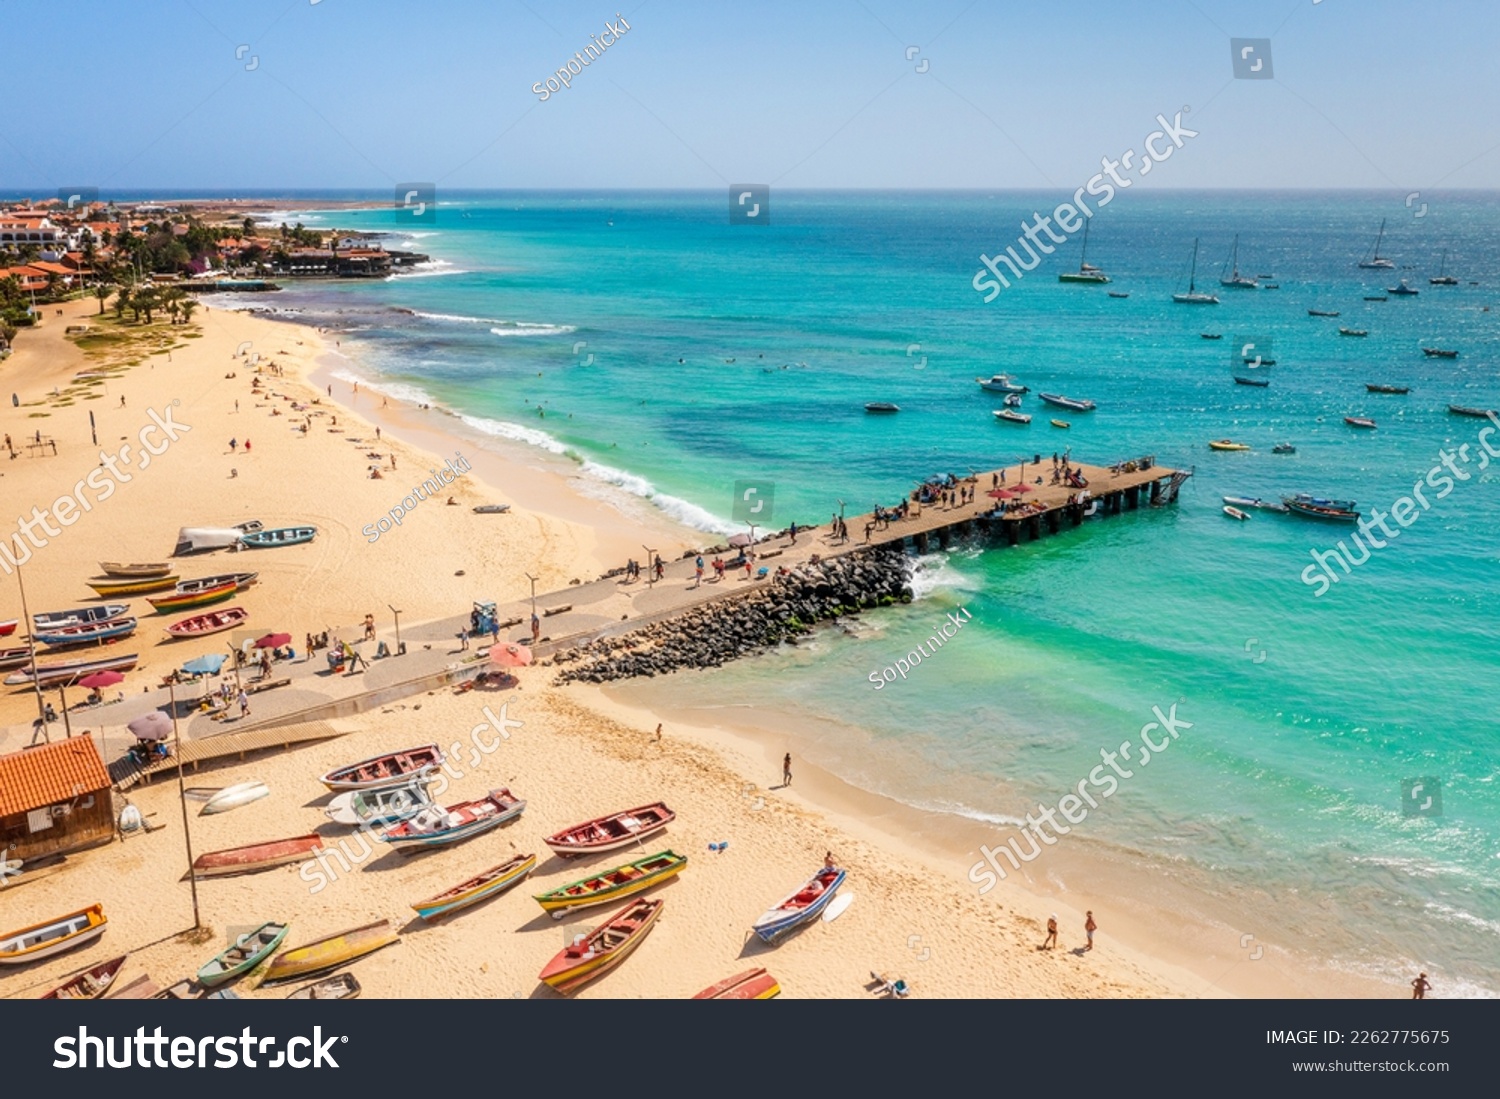 Pier and boats on turquoise water in city of Santa Maria, island of Sal, Cape Verde #2262775675